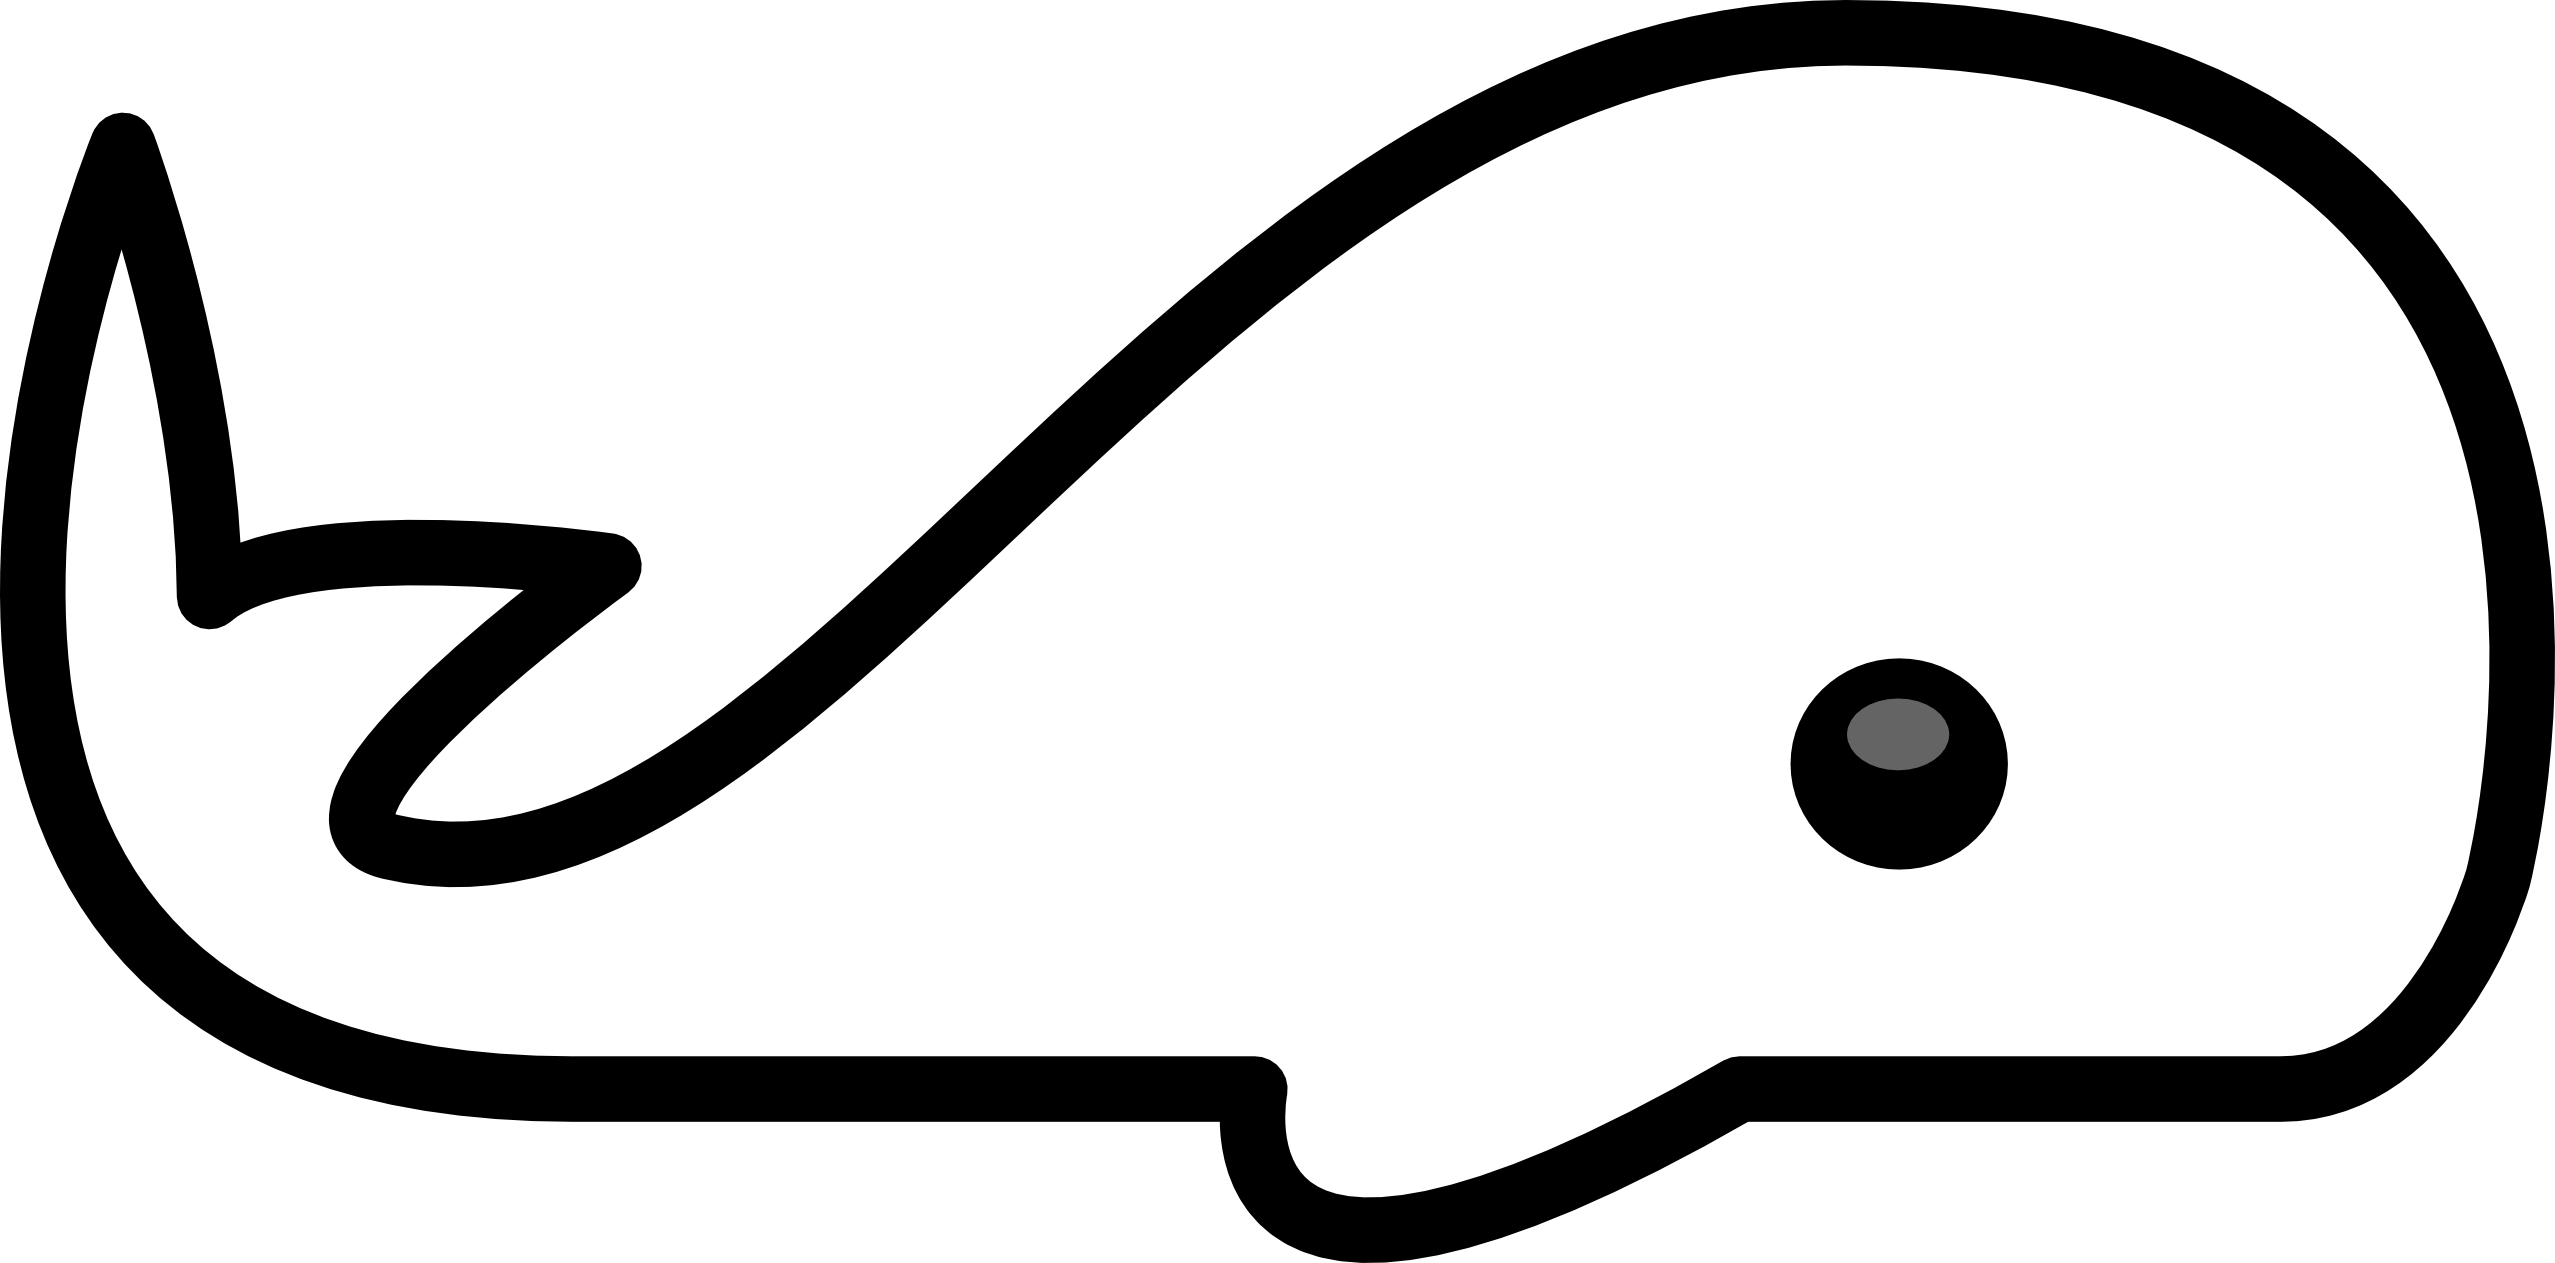 Clipart whale black and white